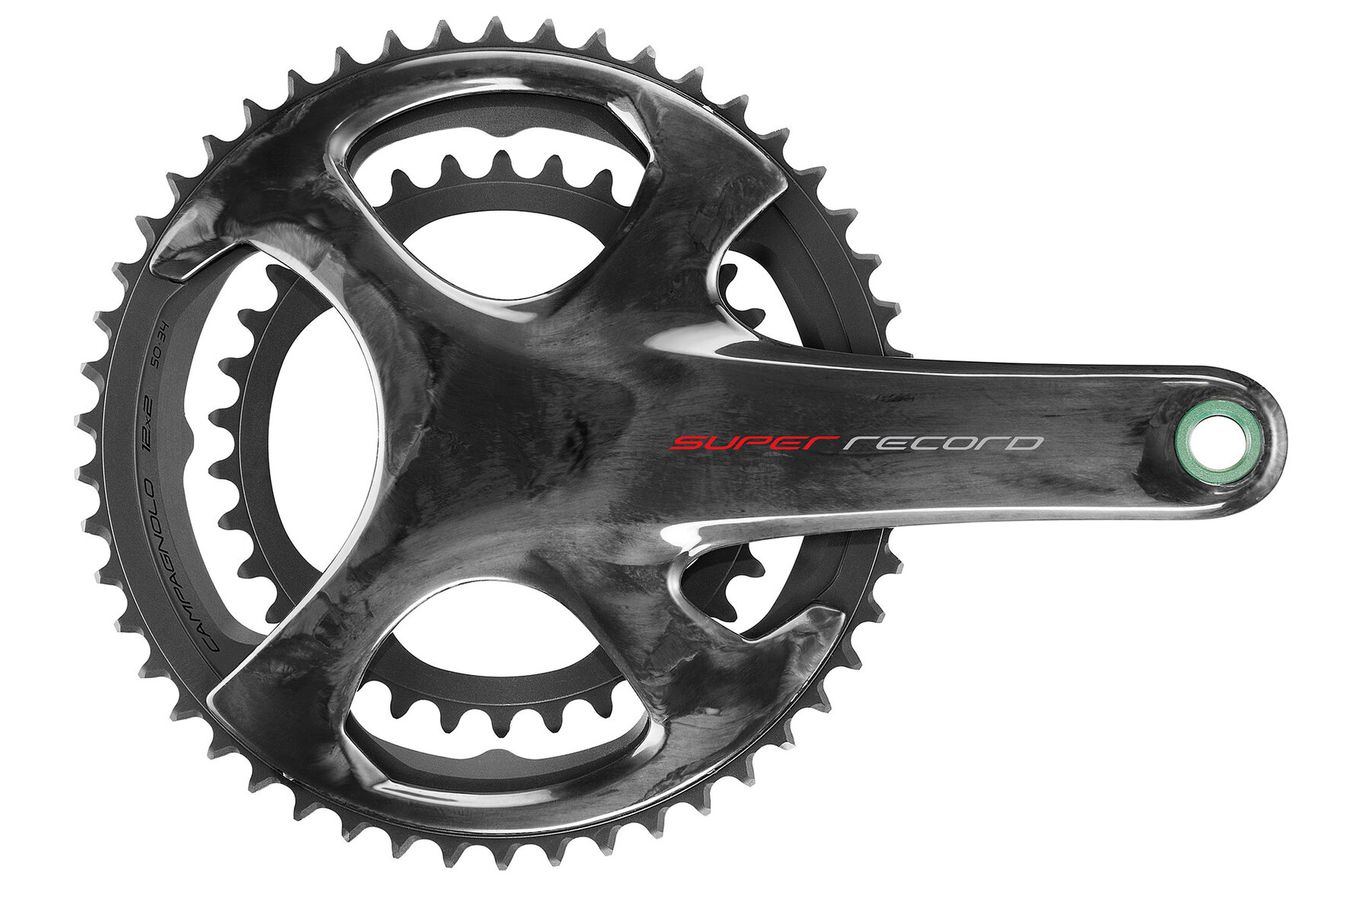 Campagnolo Super Record mechanical groupset